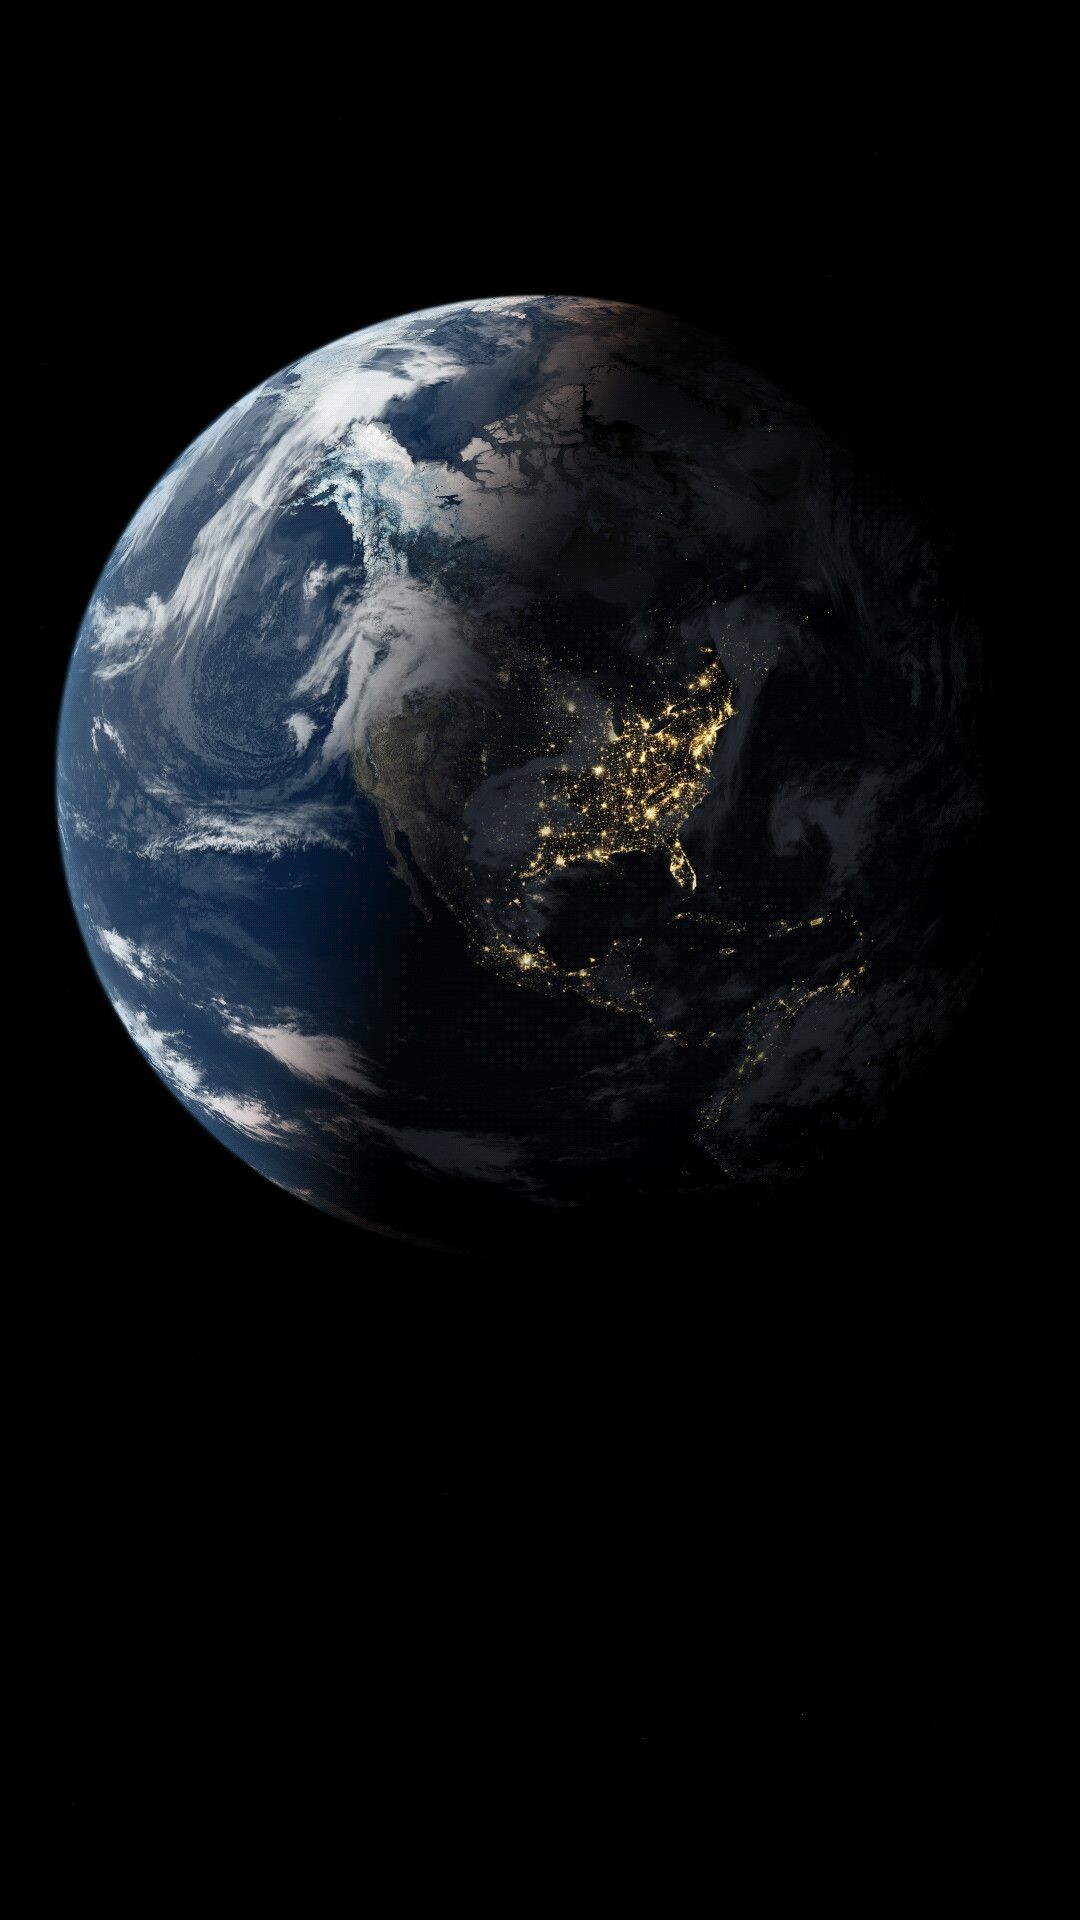 Earth at Night: Space, Oceans cover 71% of the planet's surface, Dusk. 1080x1920 Full HD Background.